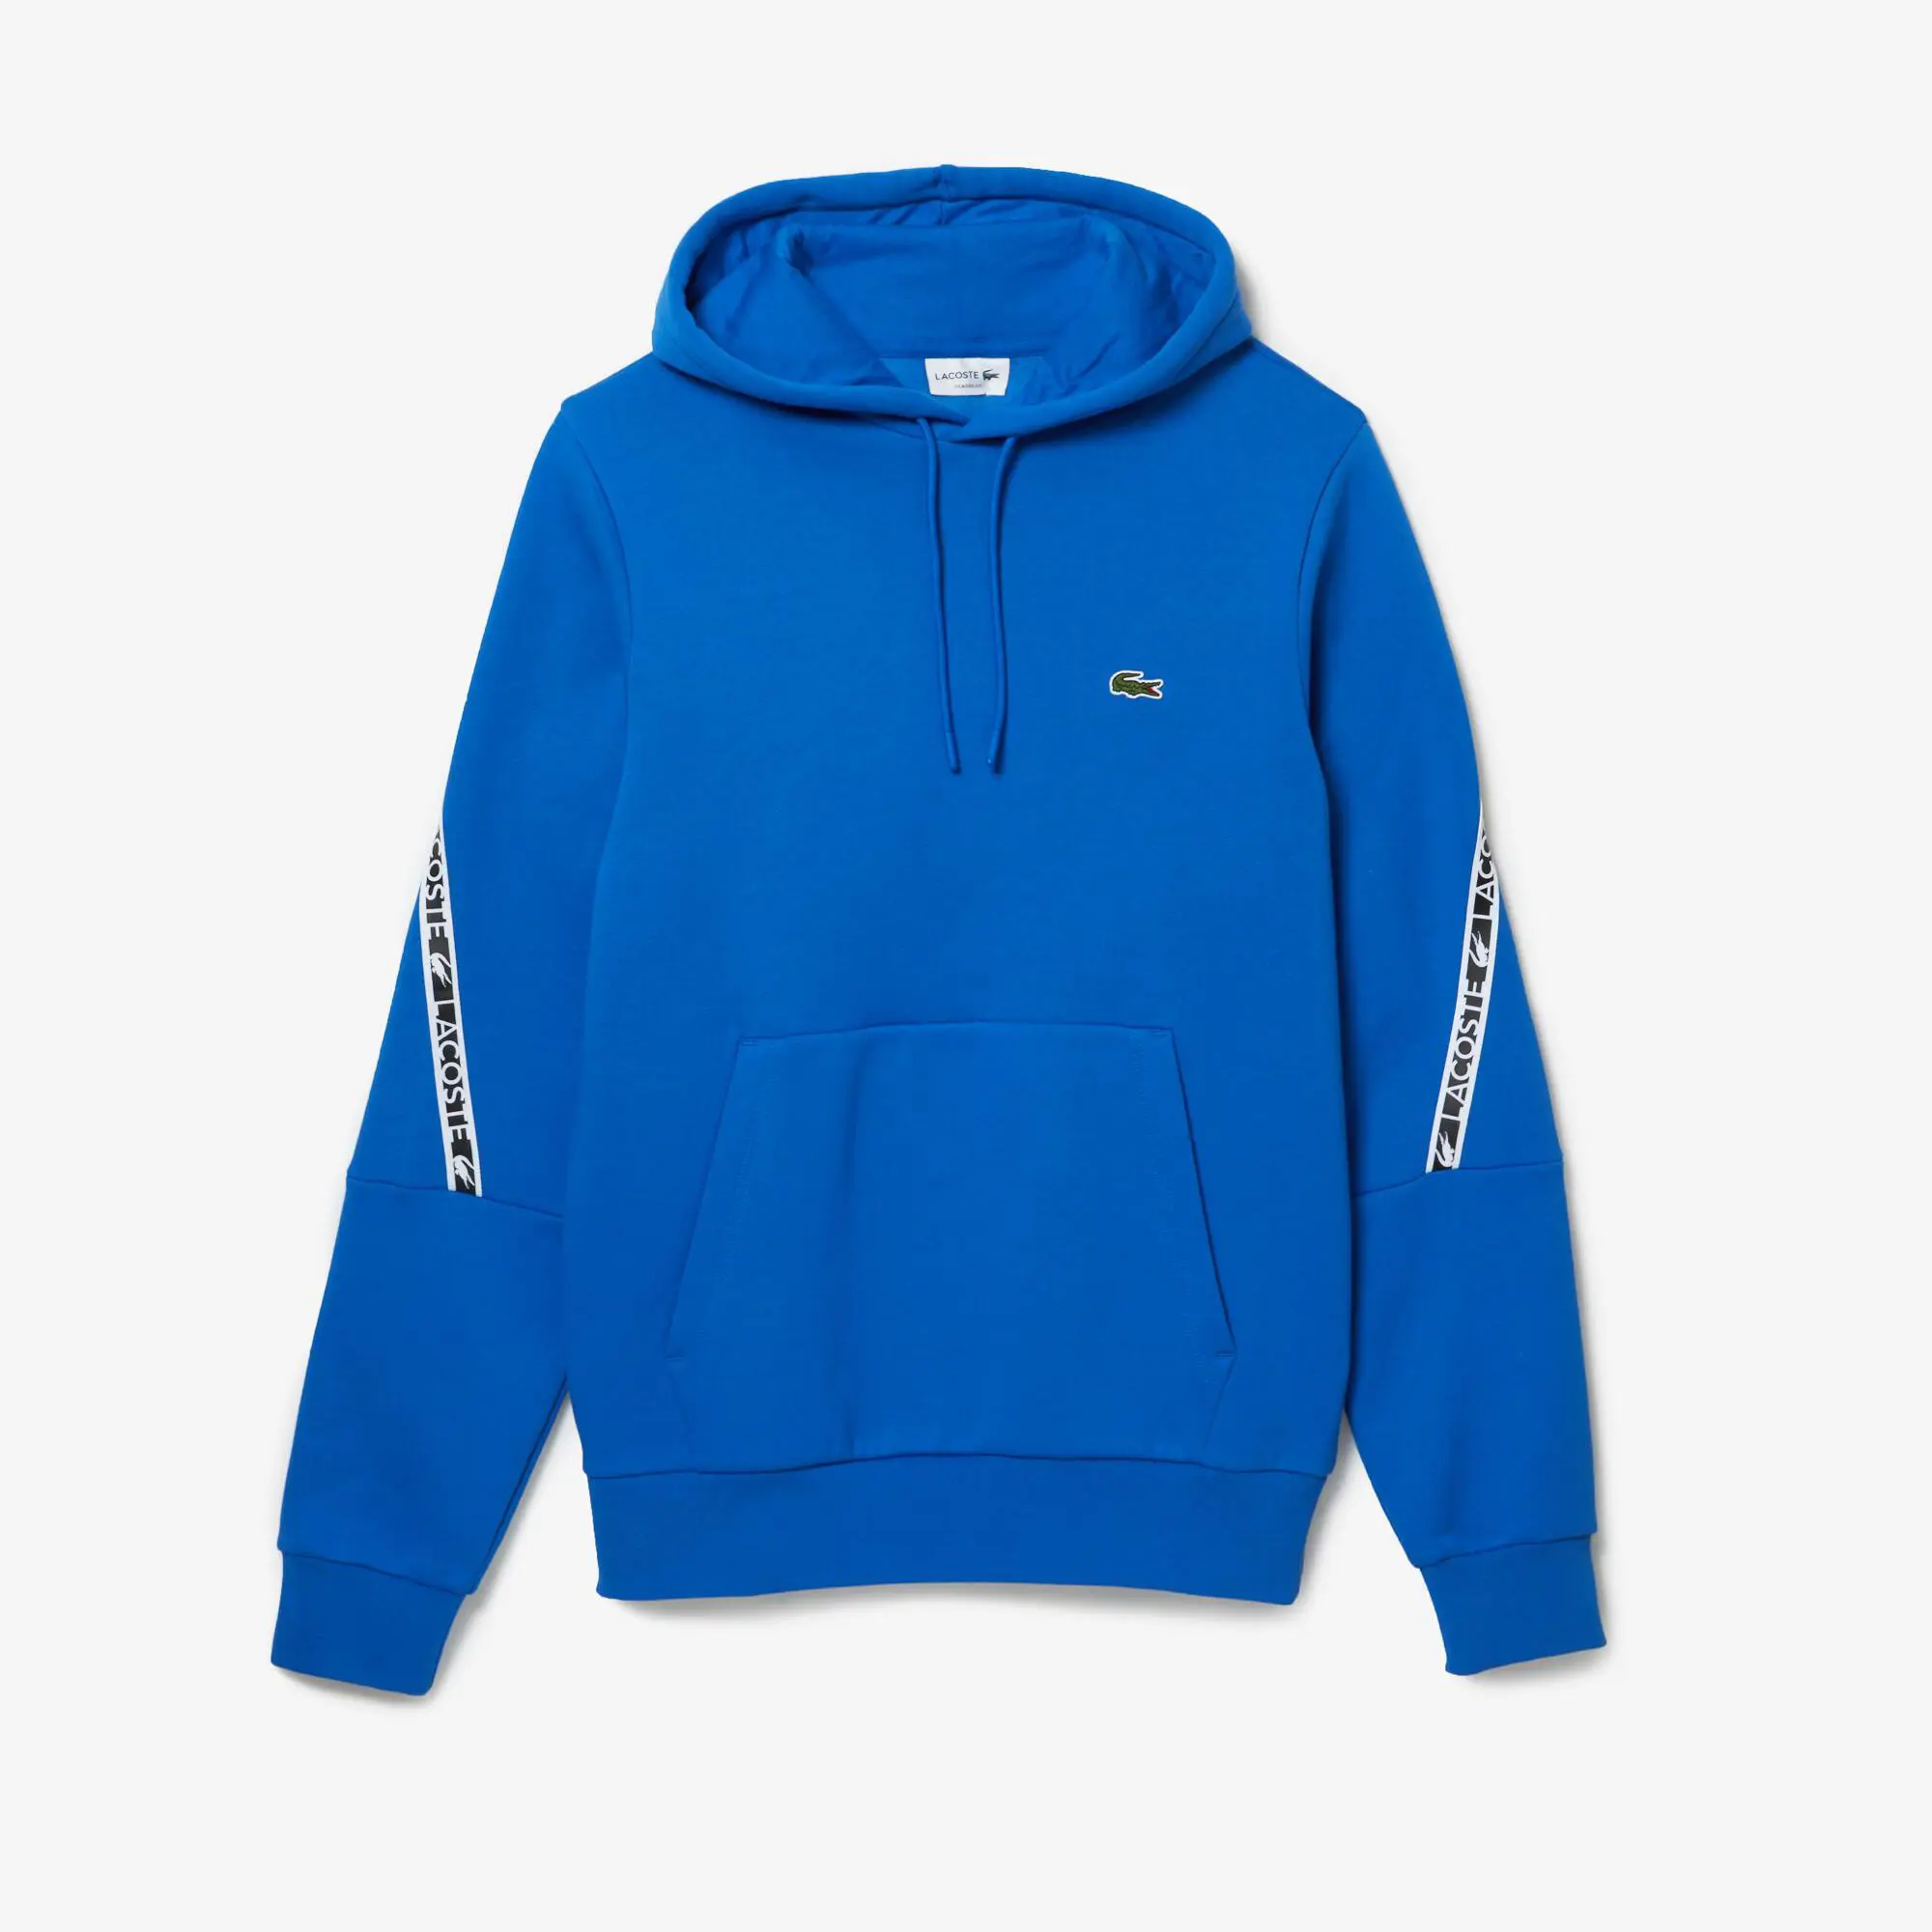 Lacoste Men's Lacoste Classic Fit Printed Bands Hooded Sweatshirt. 2